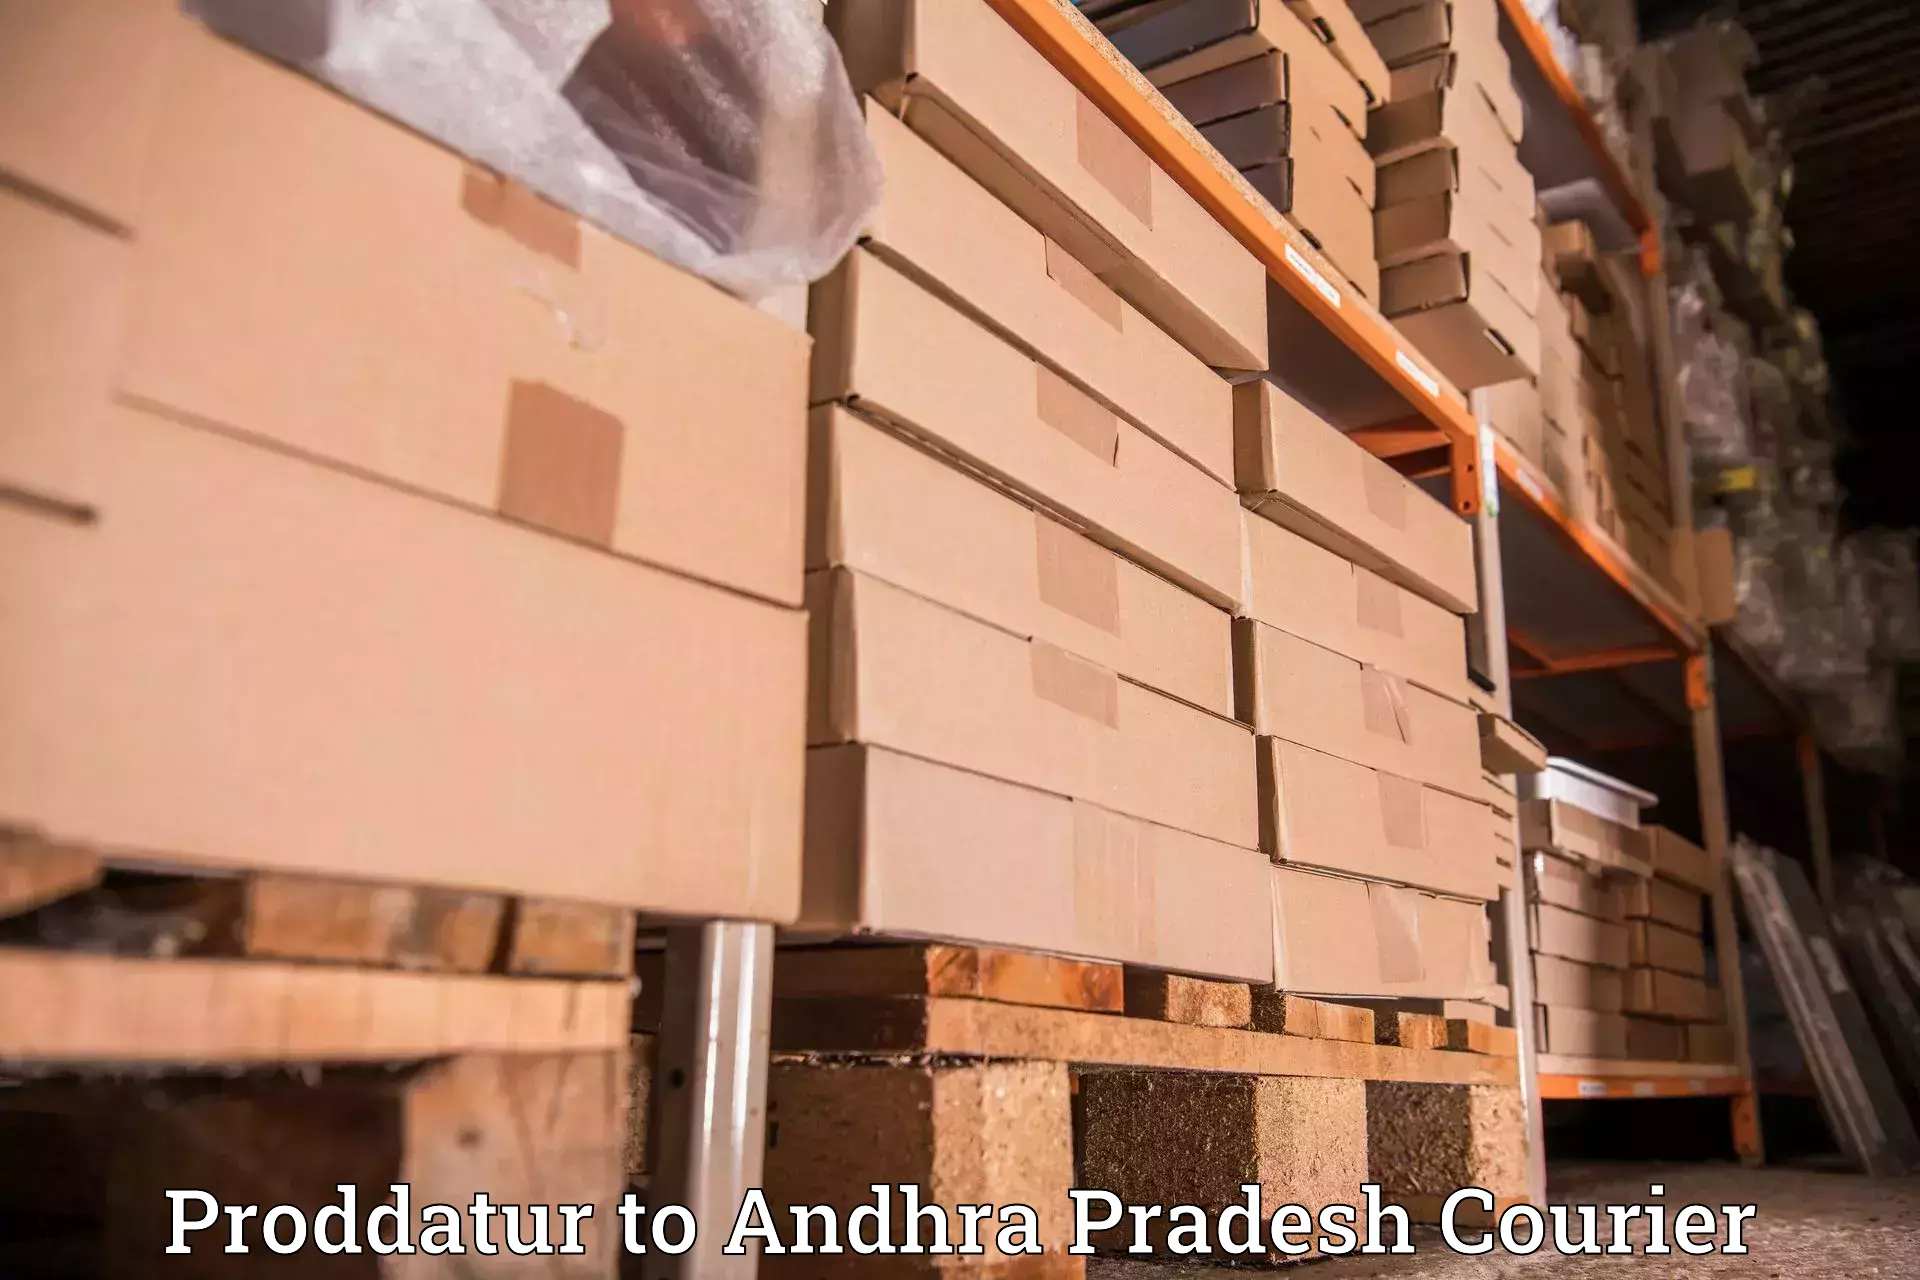 Next-day delivery options Proddatur to Kudair